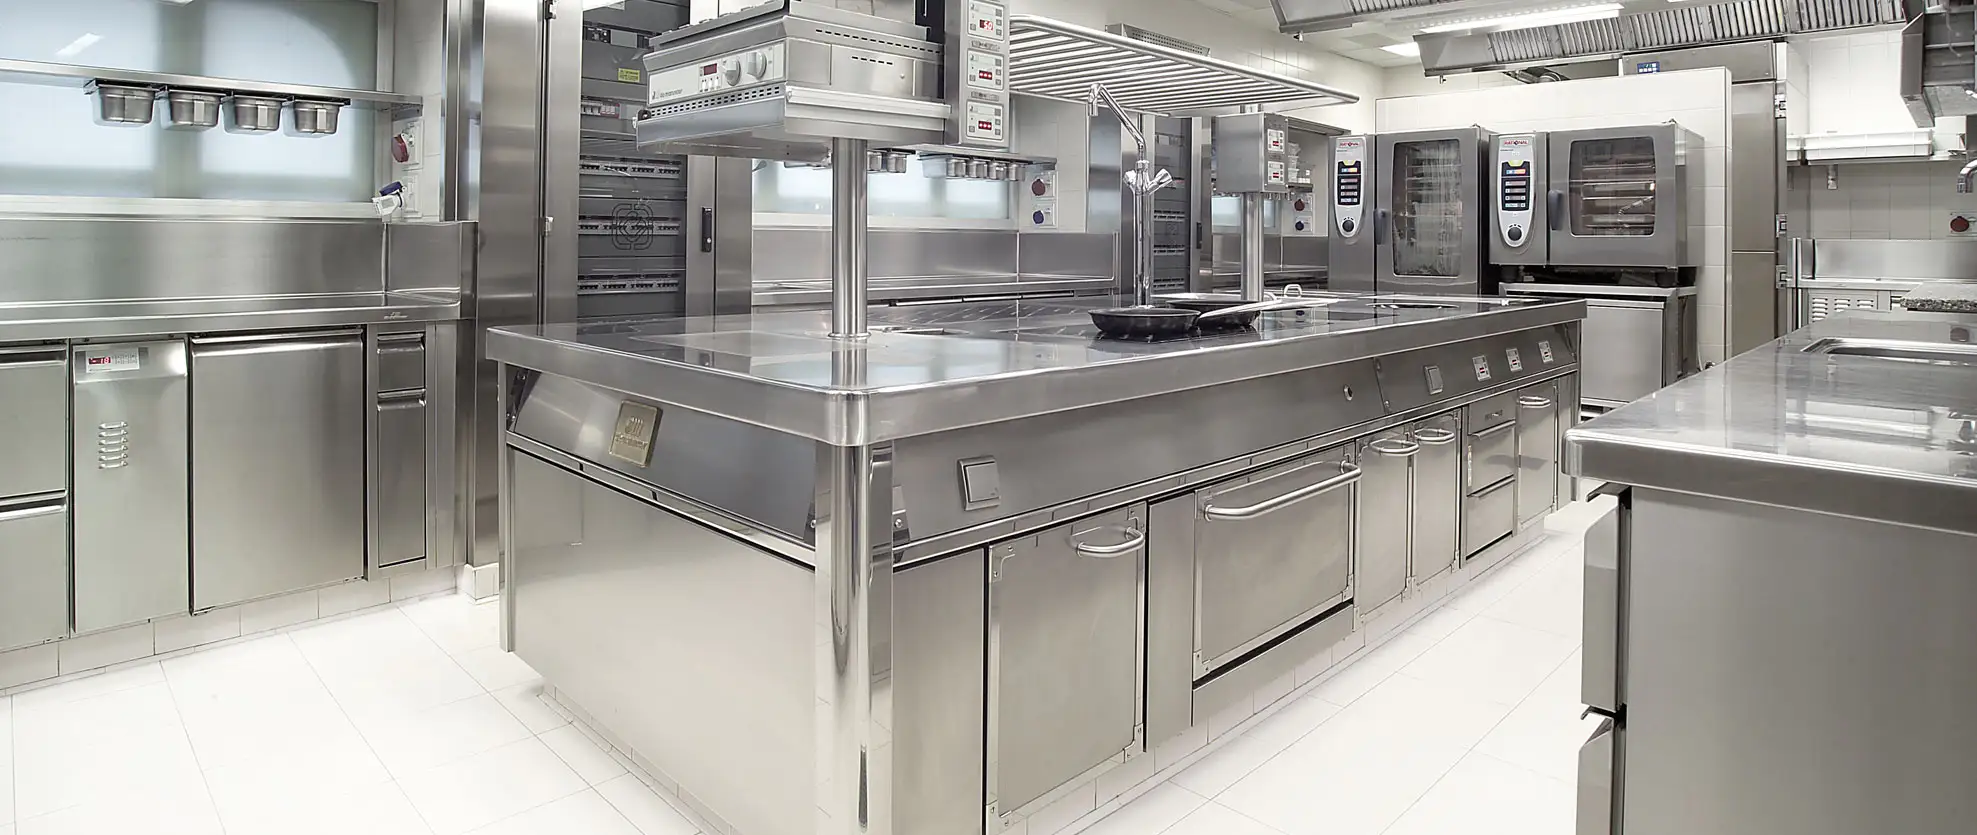 Factors to Consider Commercial Kitchen Design and Layout